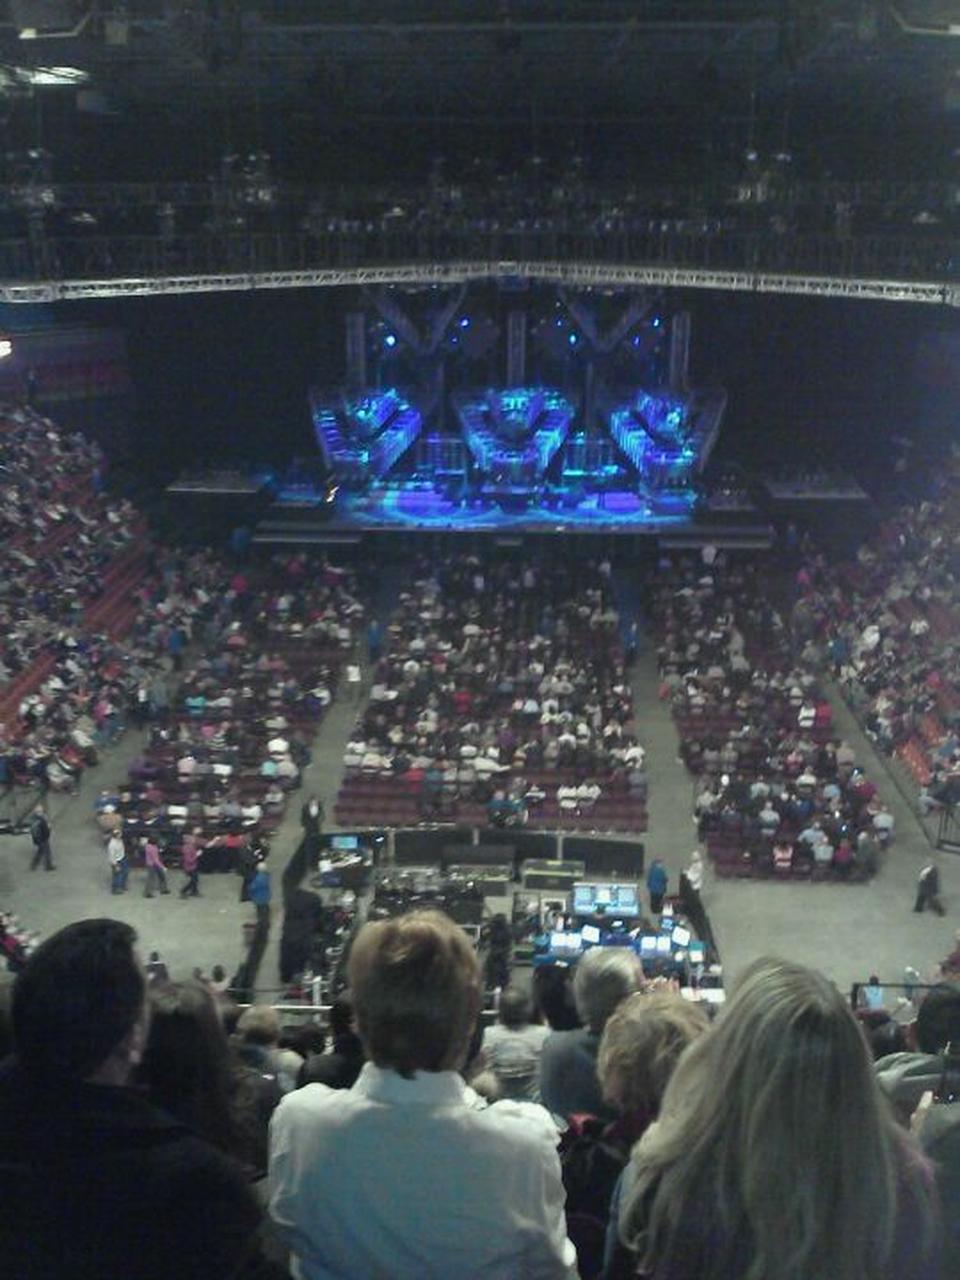 Section 112 At Mohegan Sun Arena For